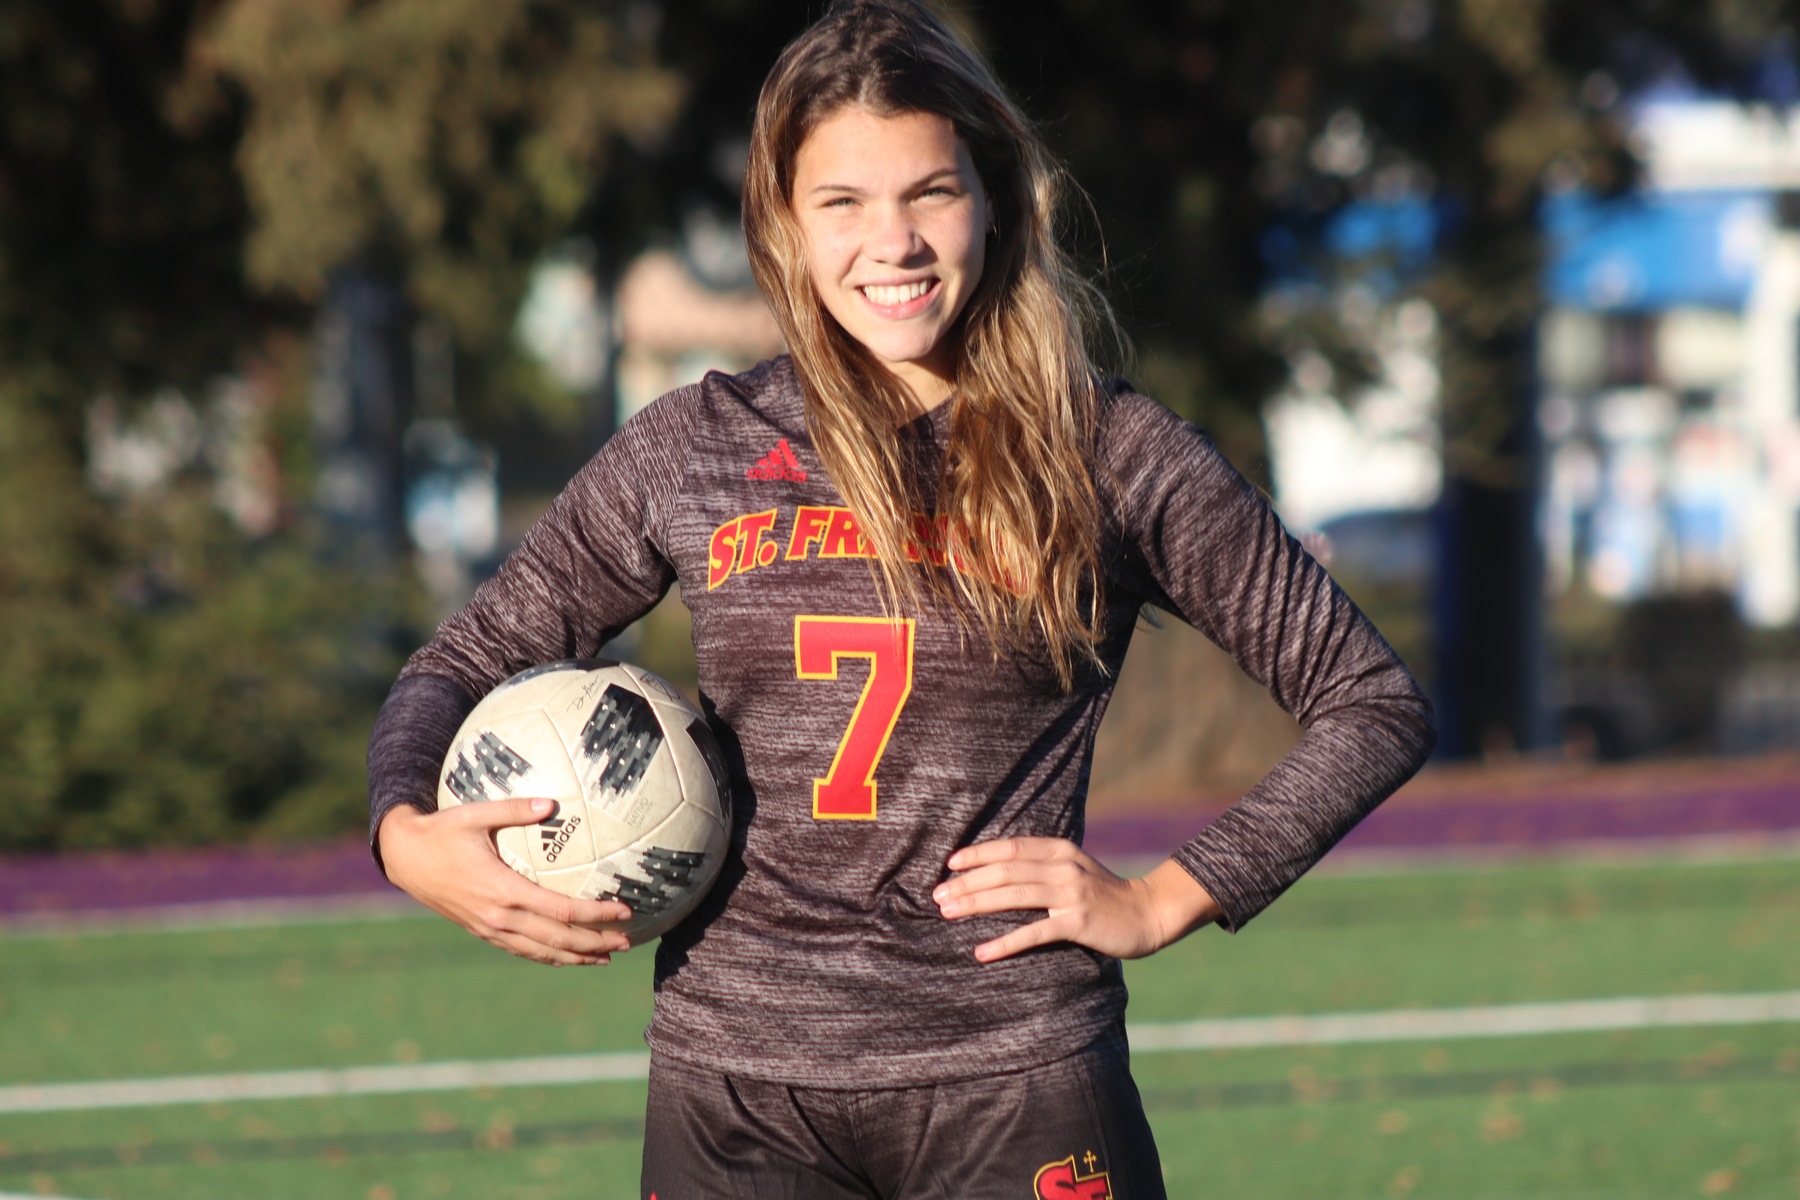 Get to Know: Soccer's #7 Arianna Spence